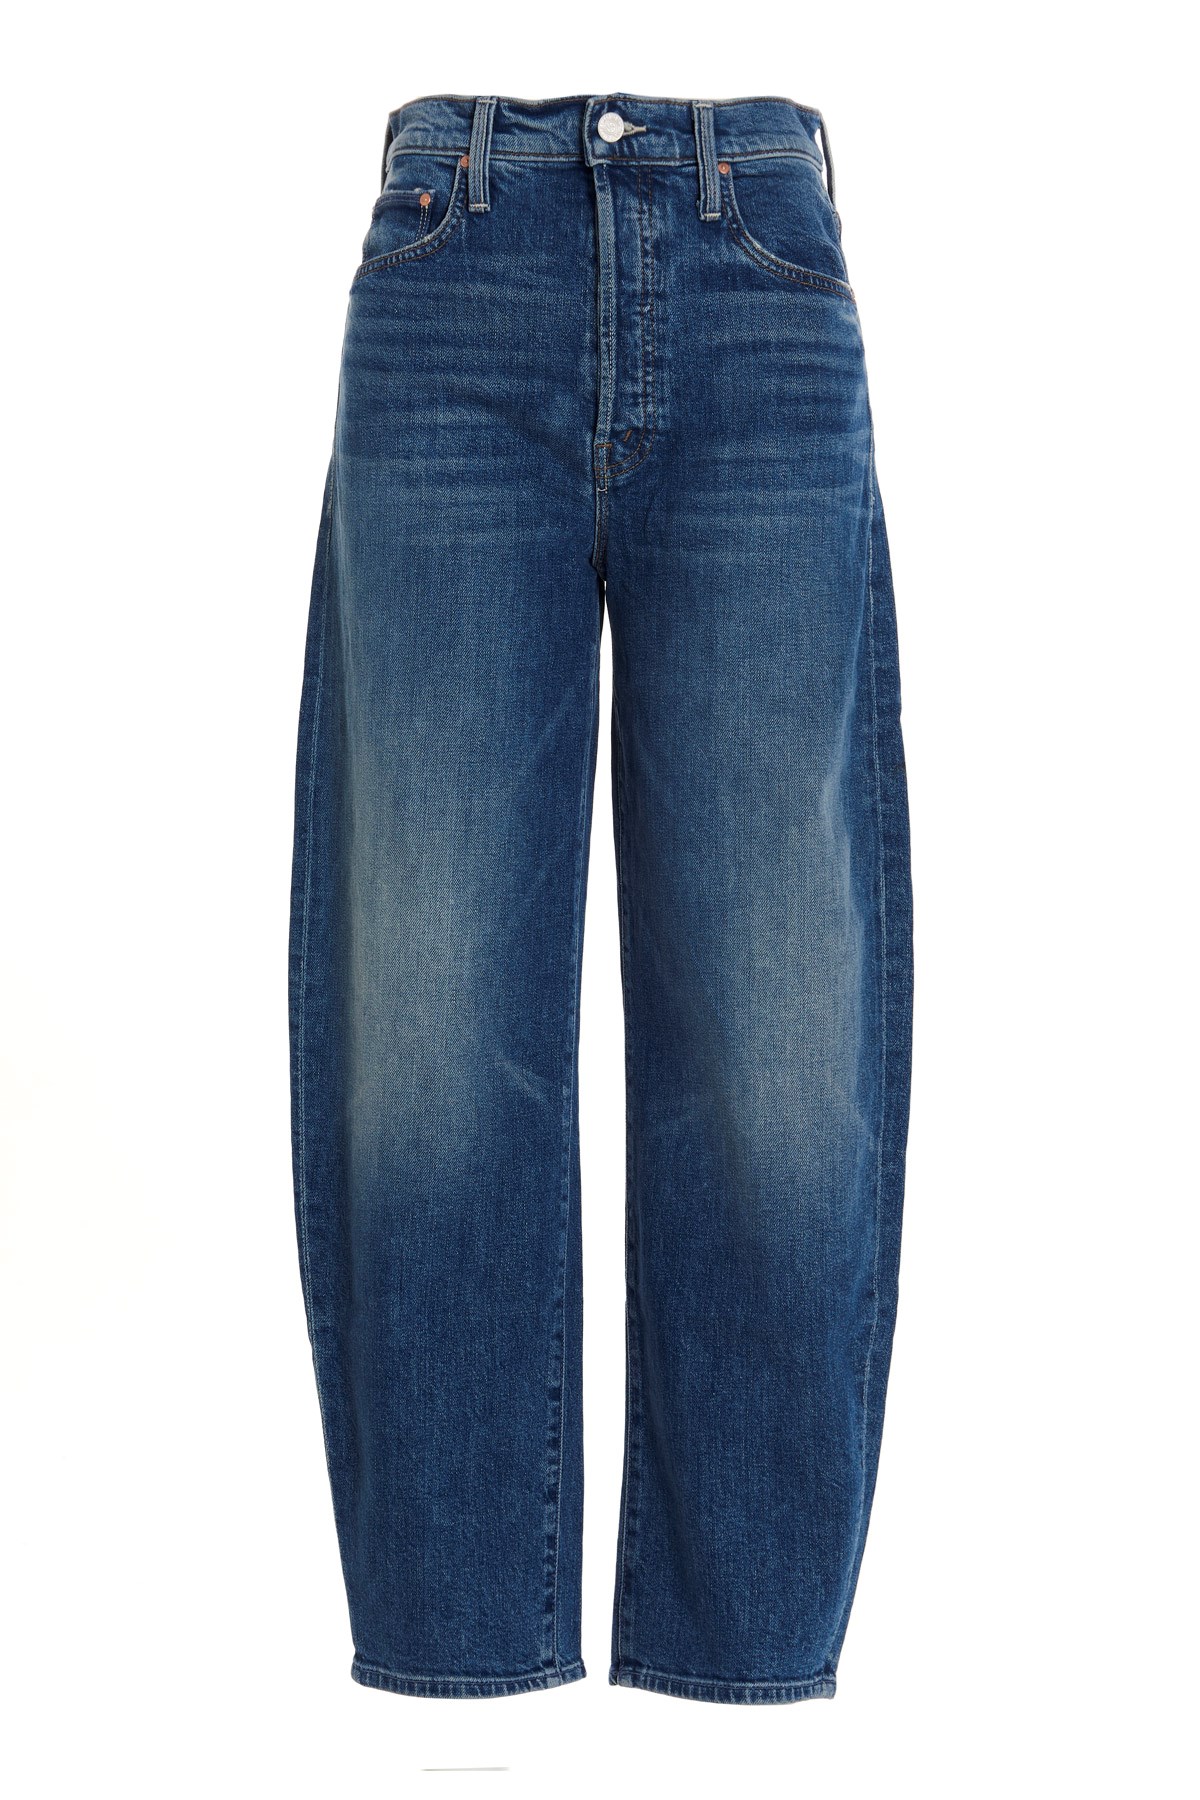 MOTHER 'The Curbside Ankle’ Jeans